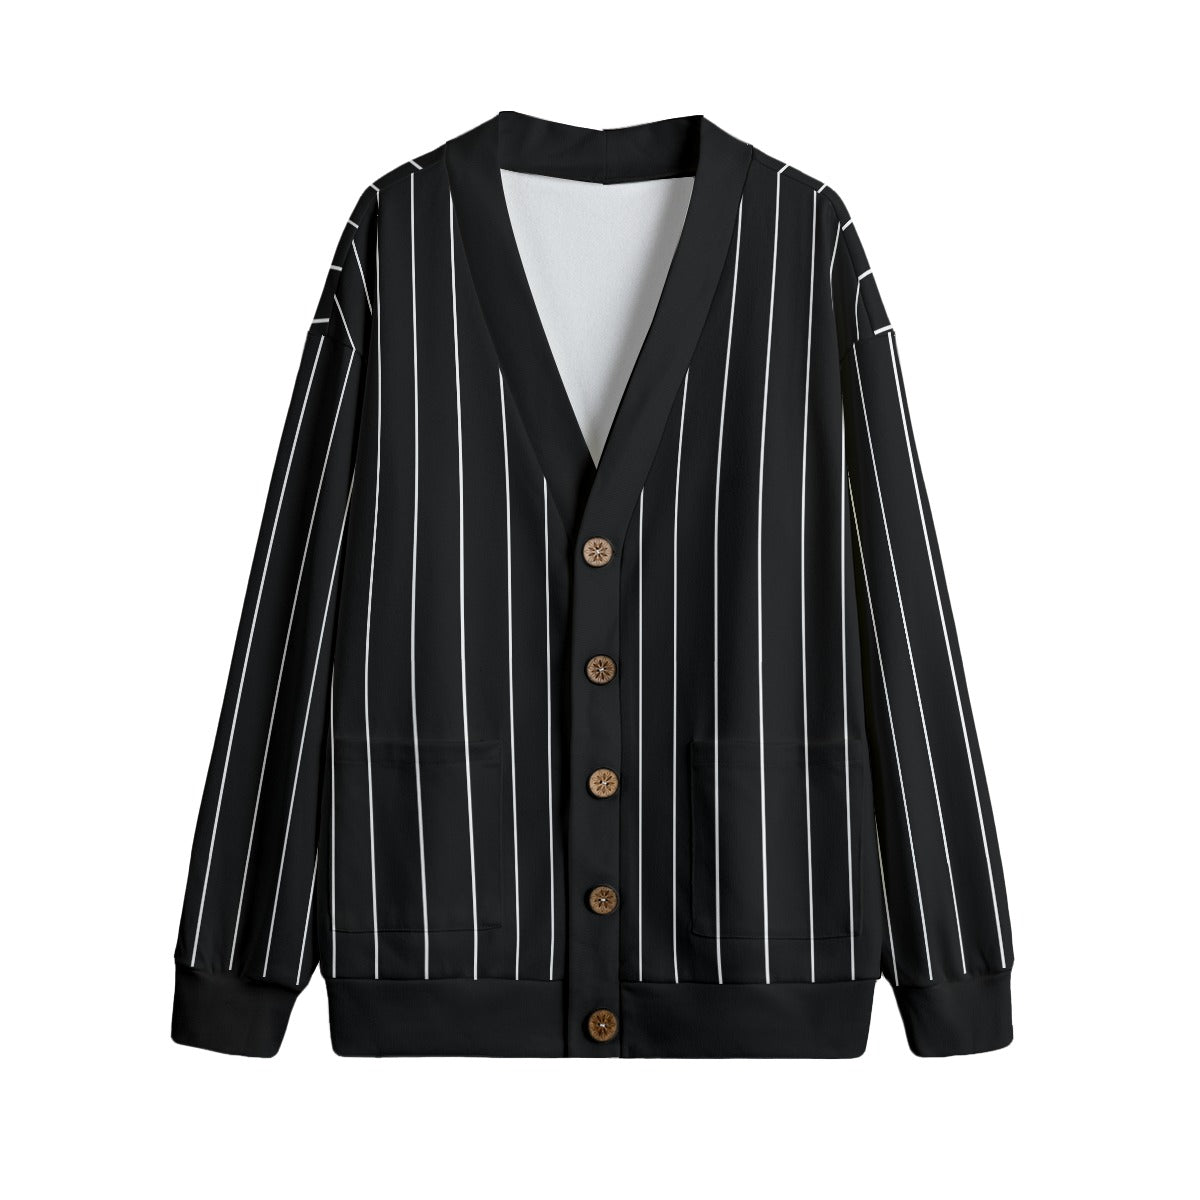 Vampire Art Victorian Stripes Black Unisex V-neck Knitted Fleece Cardigan With Buttons